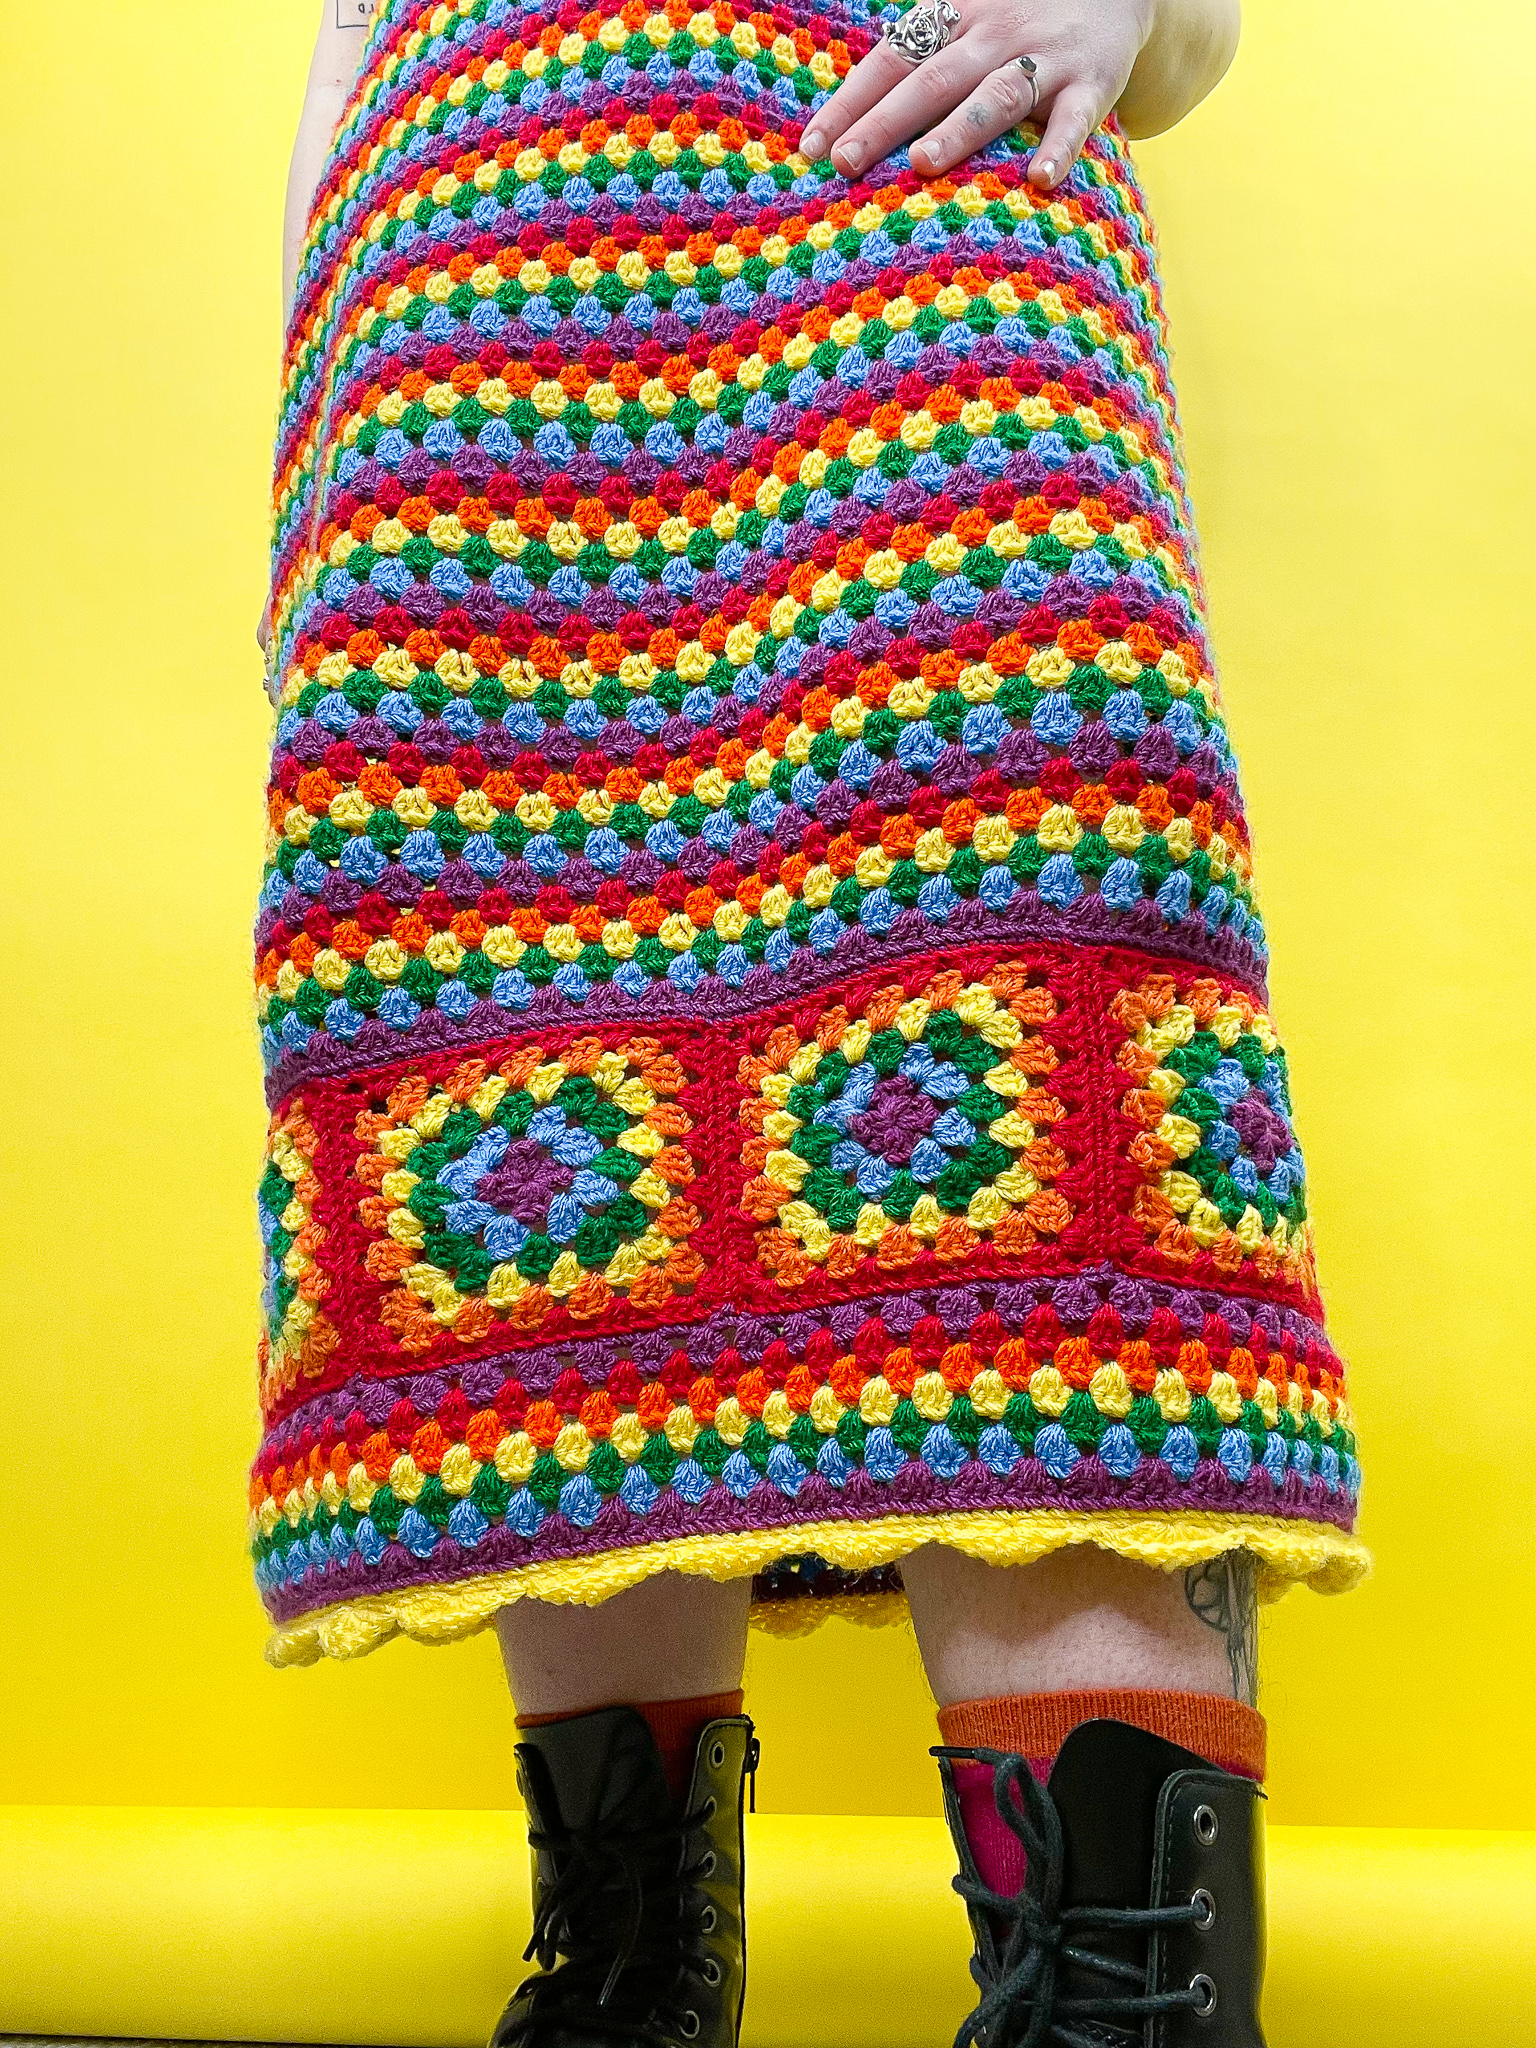 a person wearing a colorful crochet blanket